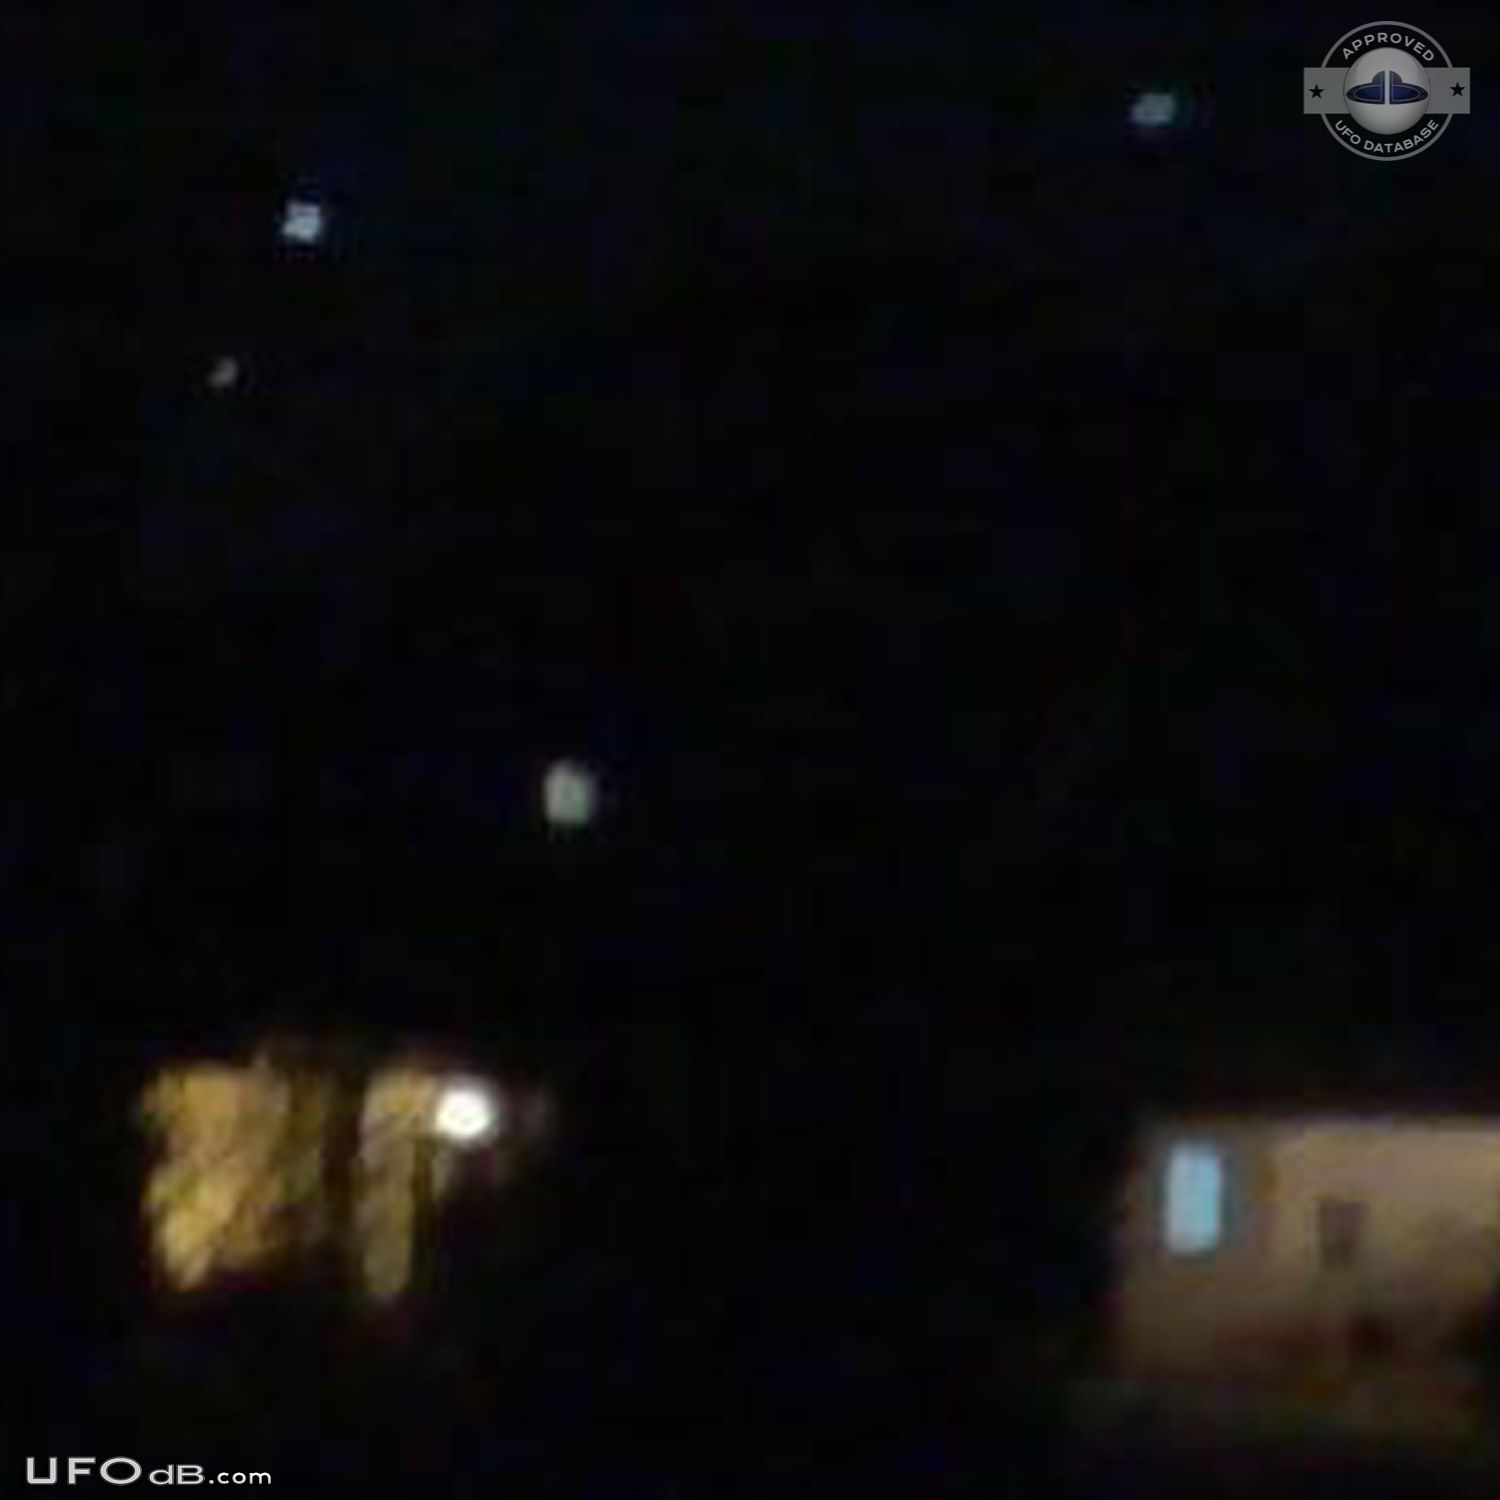 At least 20 UFOs flying near each other very bright & fast Westland MI UFO Picture #548-5